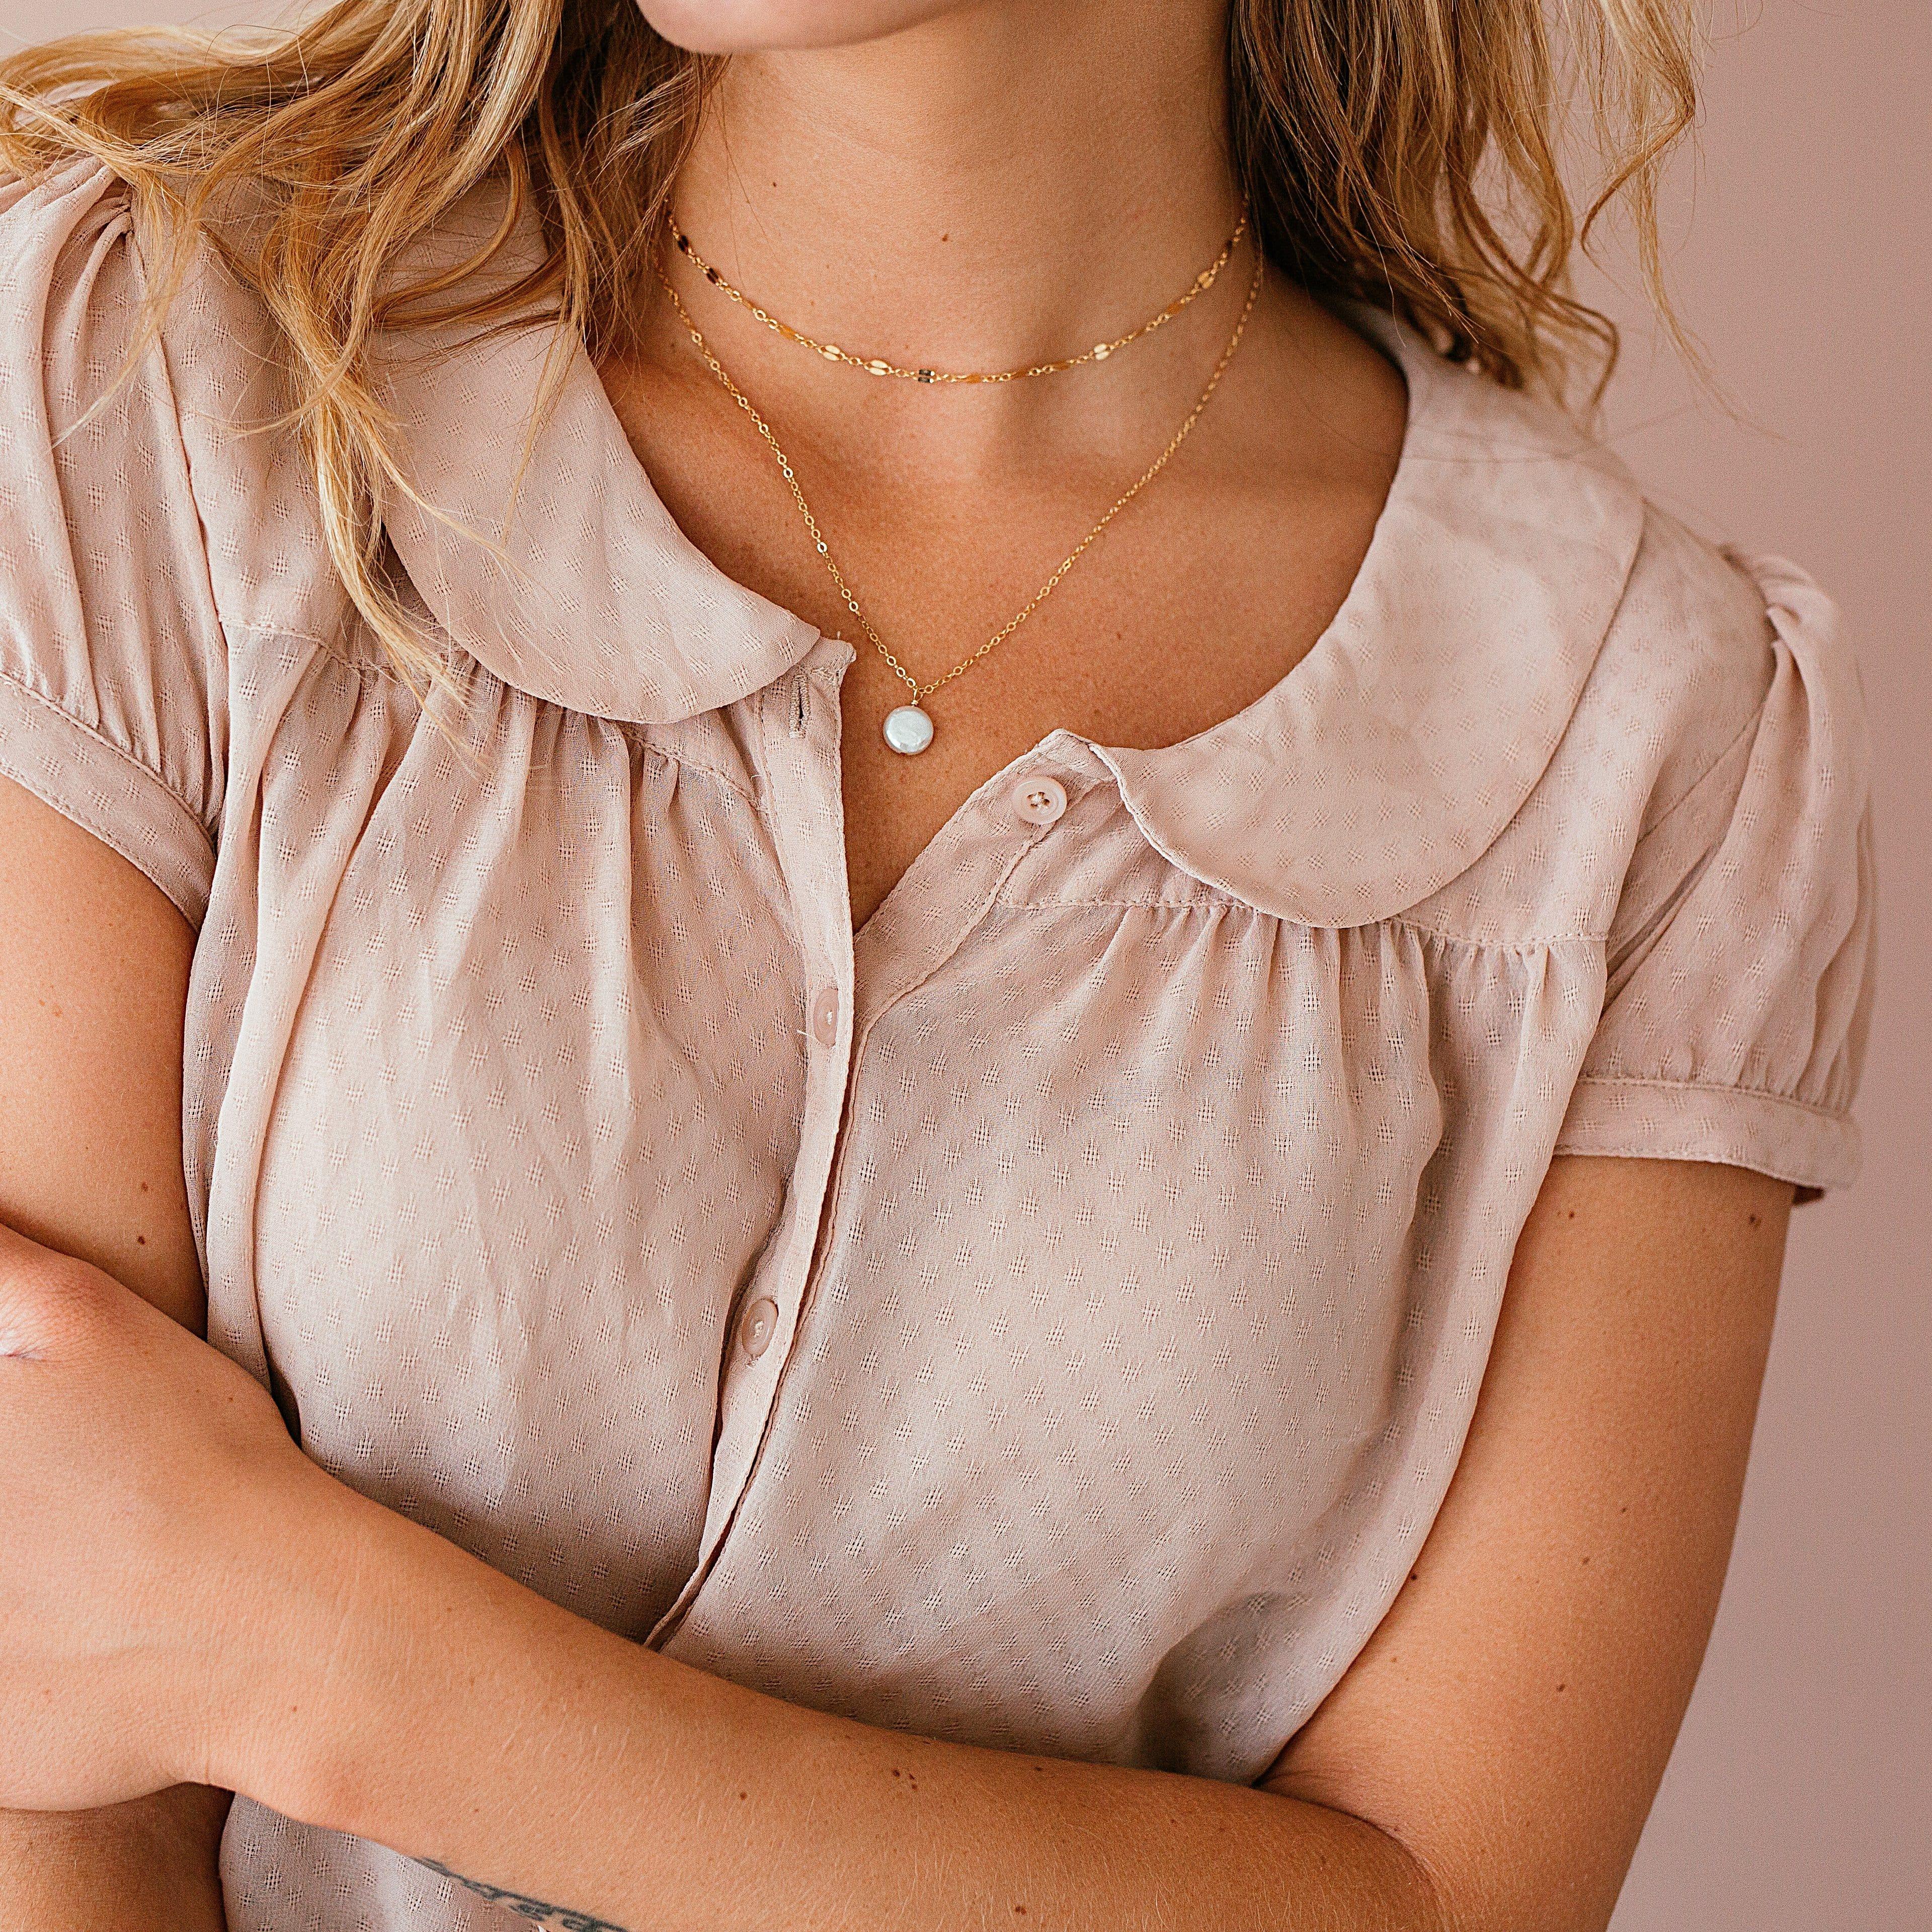 Lace Chain Necklace - Nolia Jewelry - Meaningful + Sustainably Handcrafted Jewelry